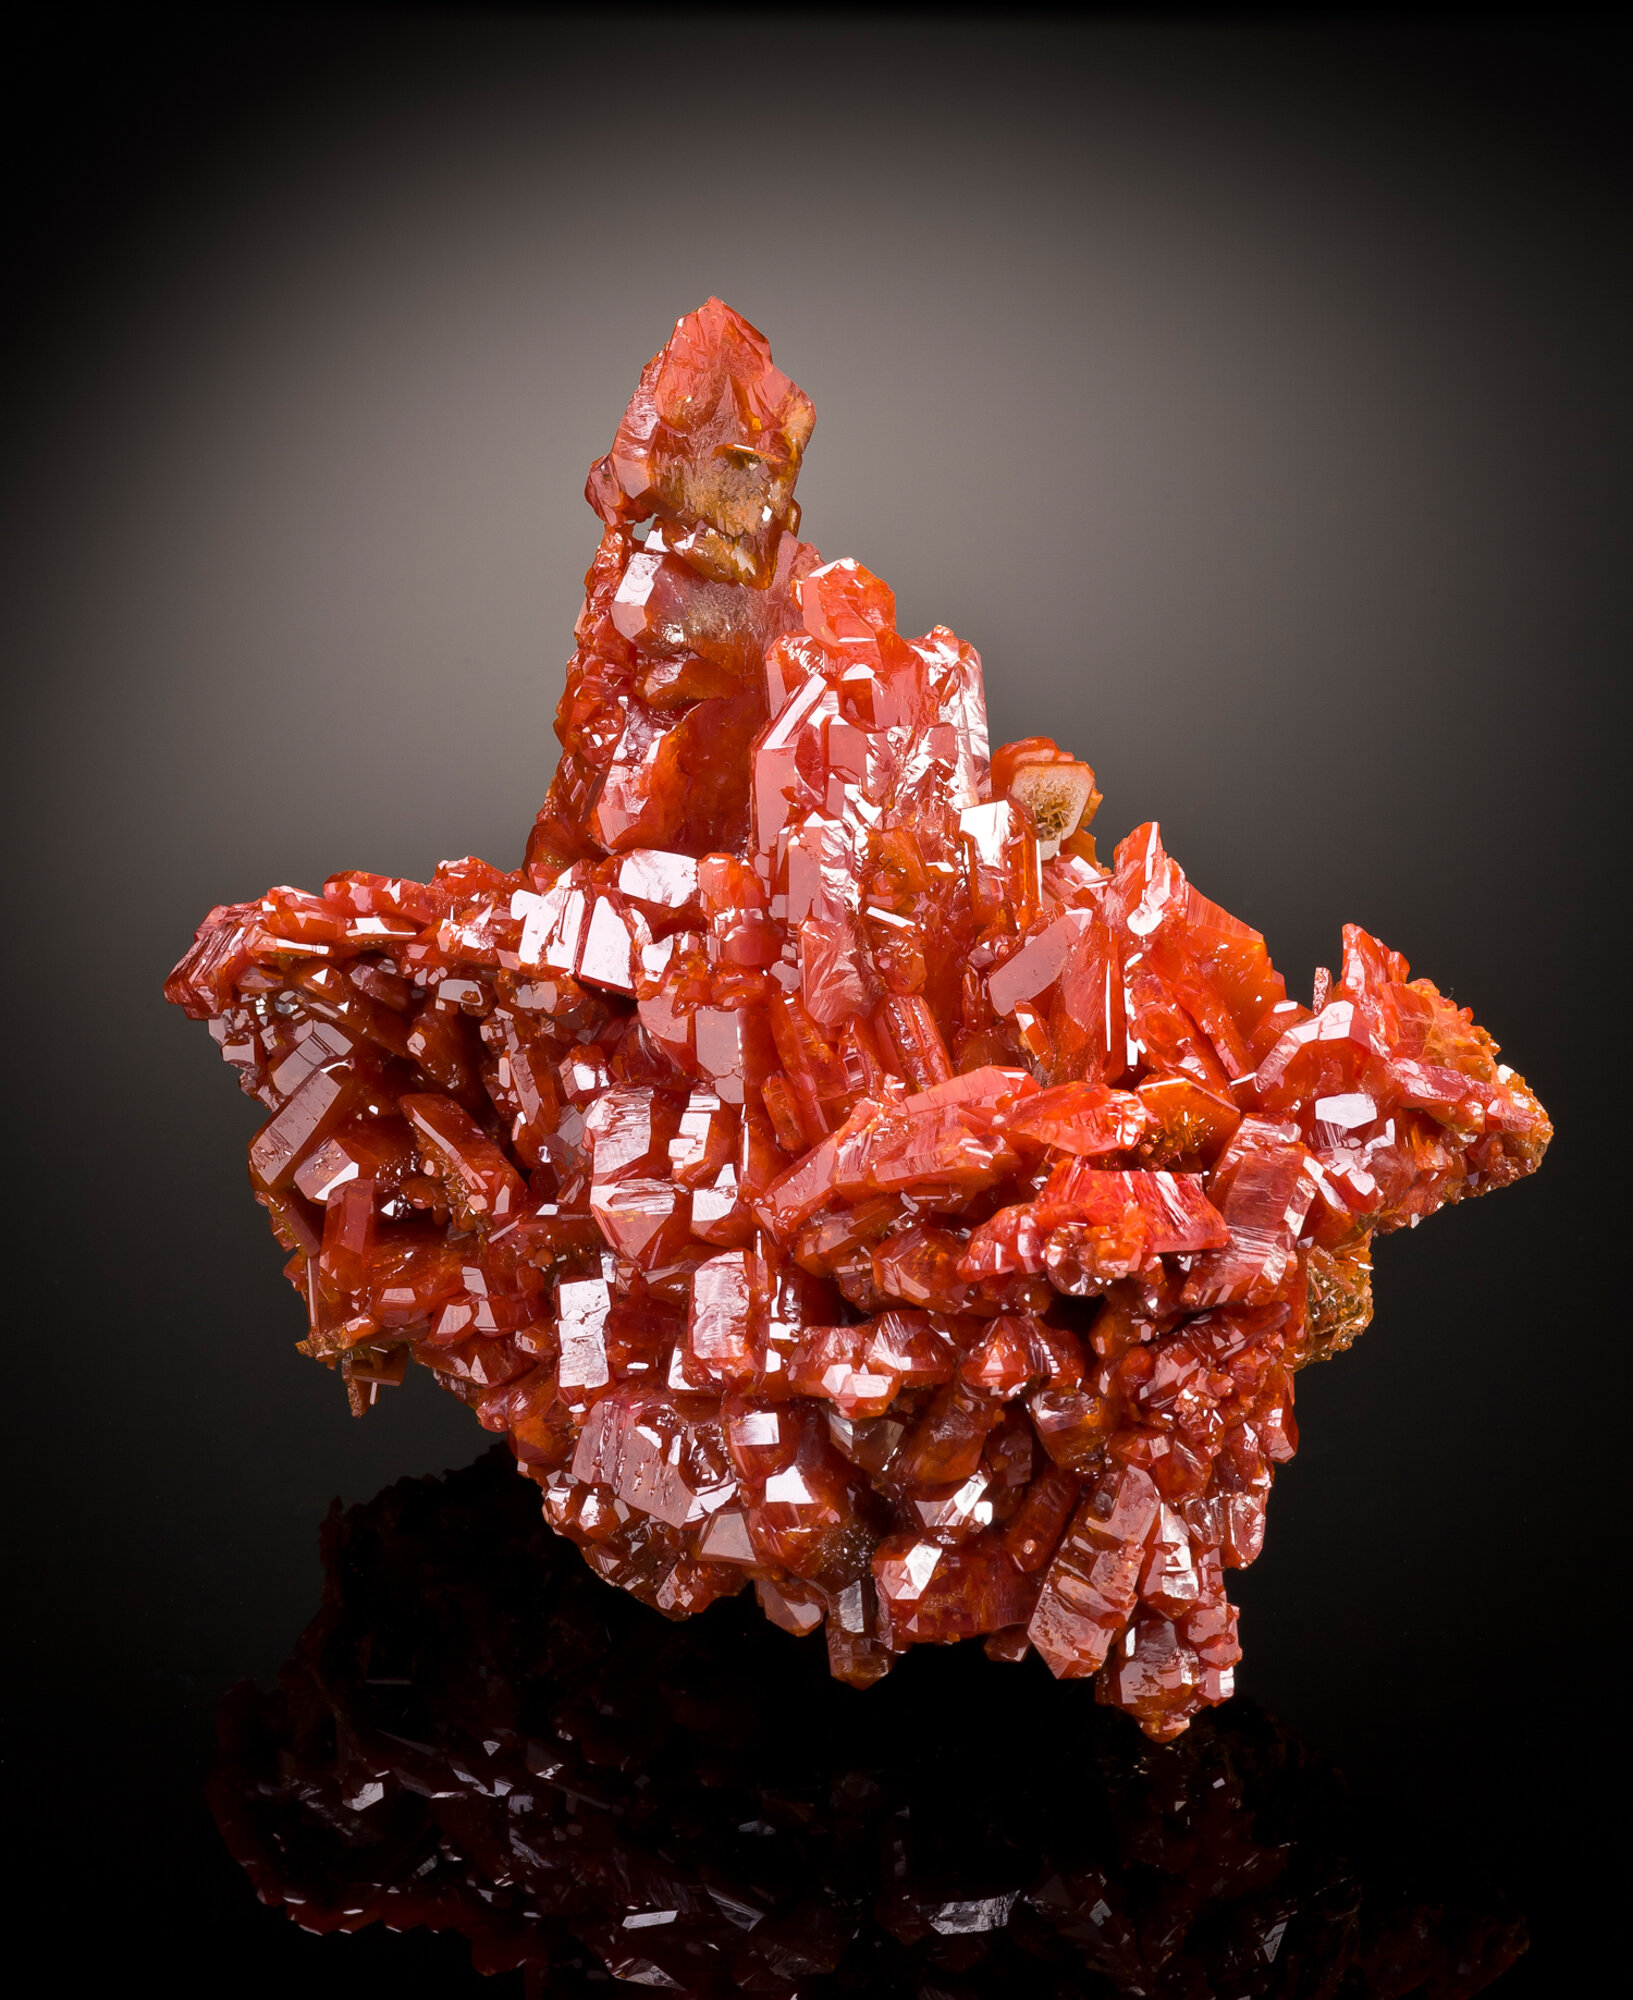  Wulfenite, 12.5 cm, from the Jianshan mine, Kuruktag Mountains, Ruoqiang County, Bayingolin Prefecture, Xinjiang Uyghur Autonomous Region, China. Found in 2009. This specimen is probably the finest known Chinese wulfenite. 